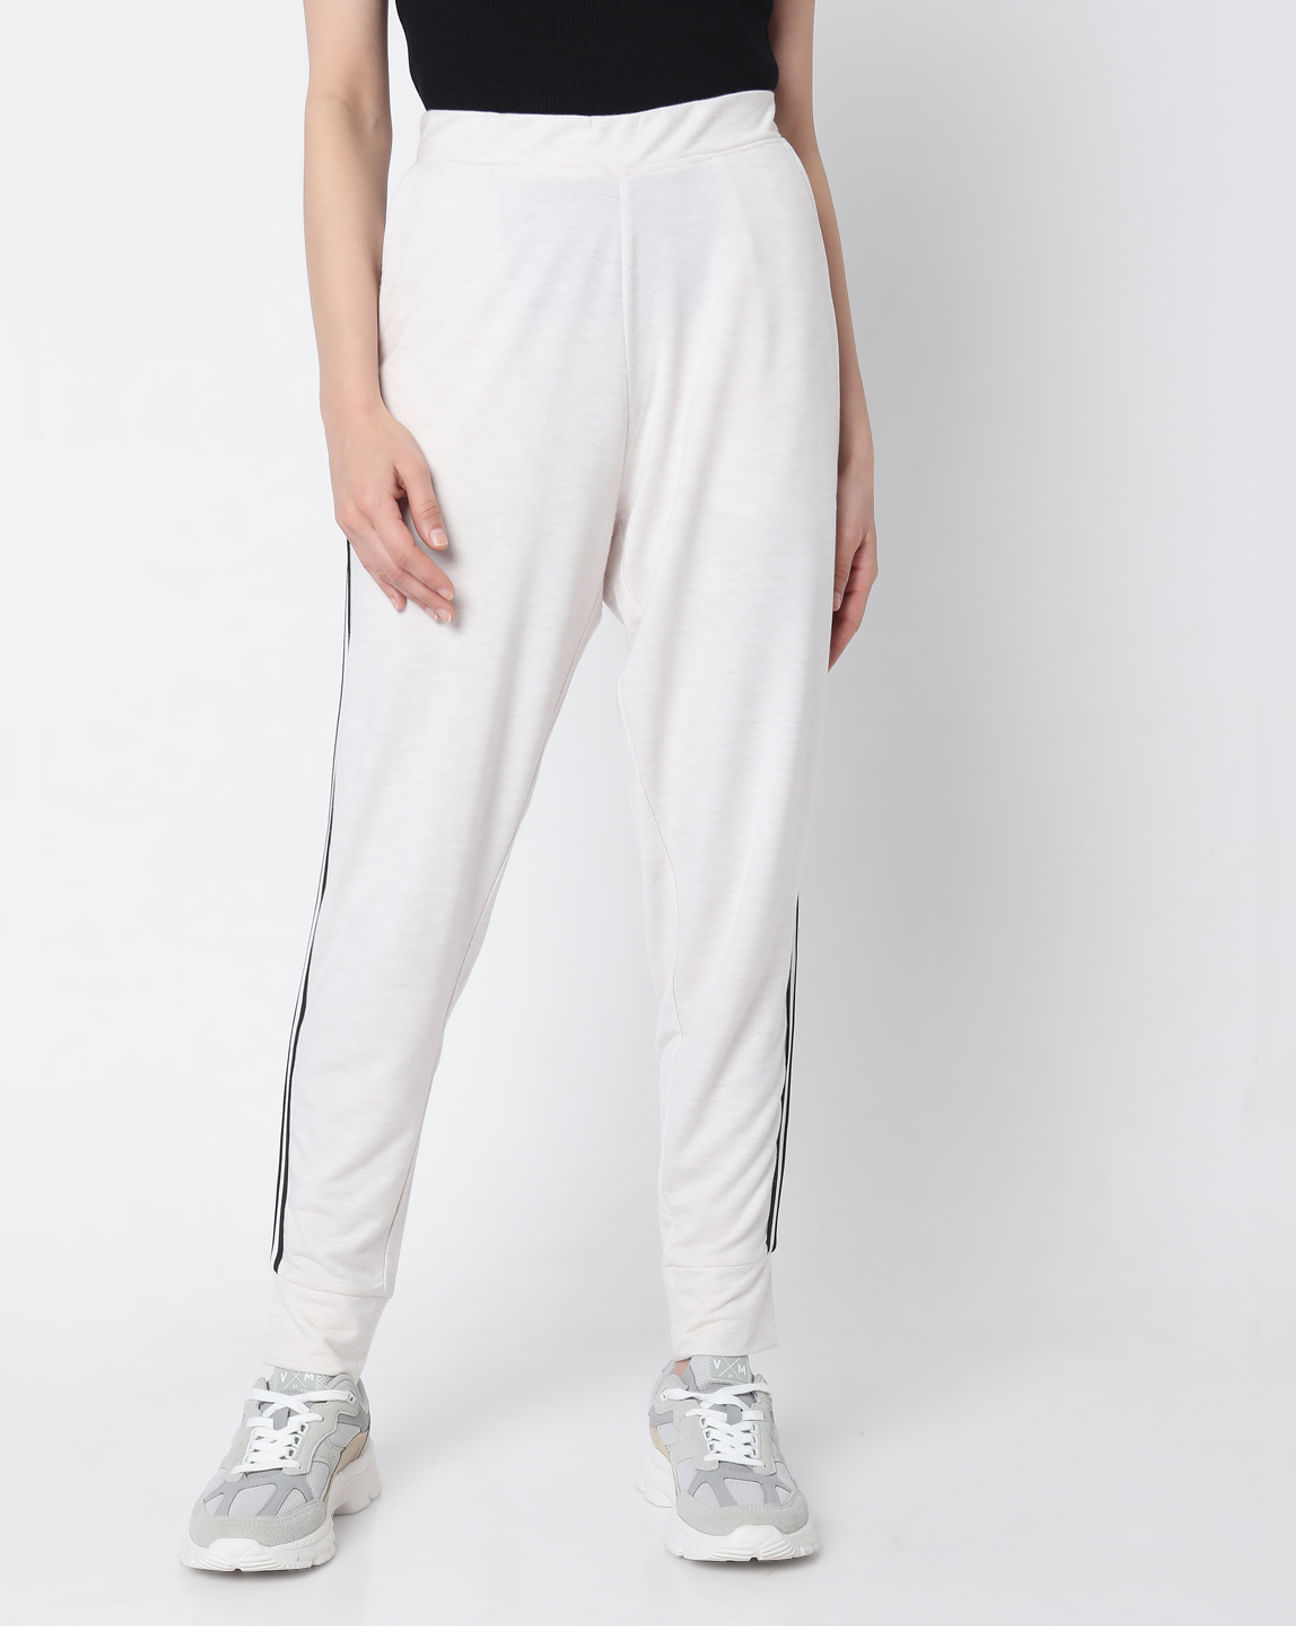 Women joggers at Rs 299/piece, Thane